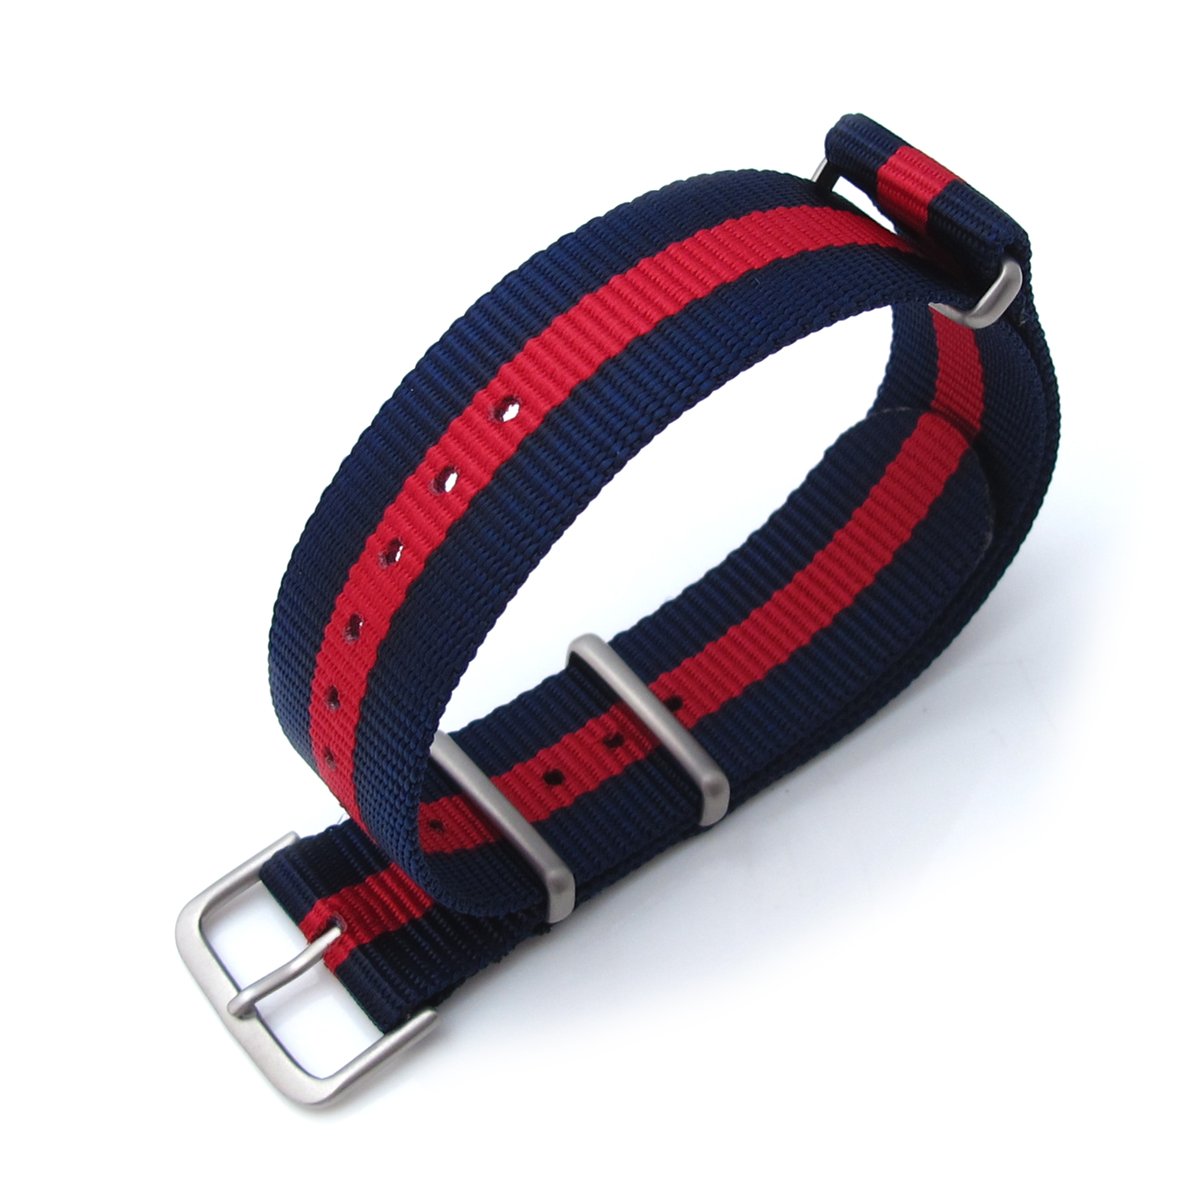 MiLTAT 20mm G10 military watch strap ballistic nylon armband Brushed Red & Blue Stripes Strapcode Watch Bands